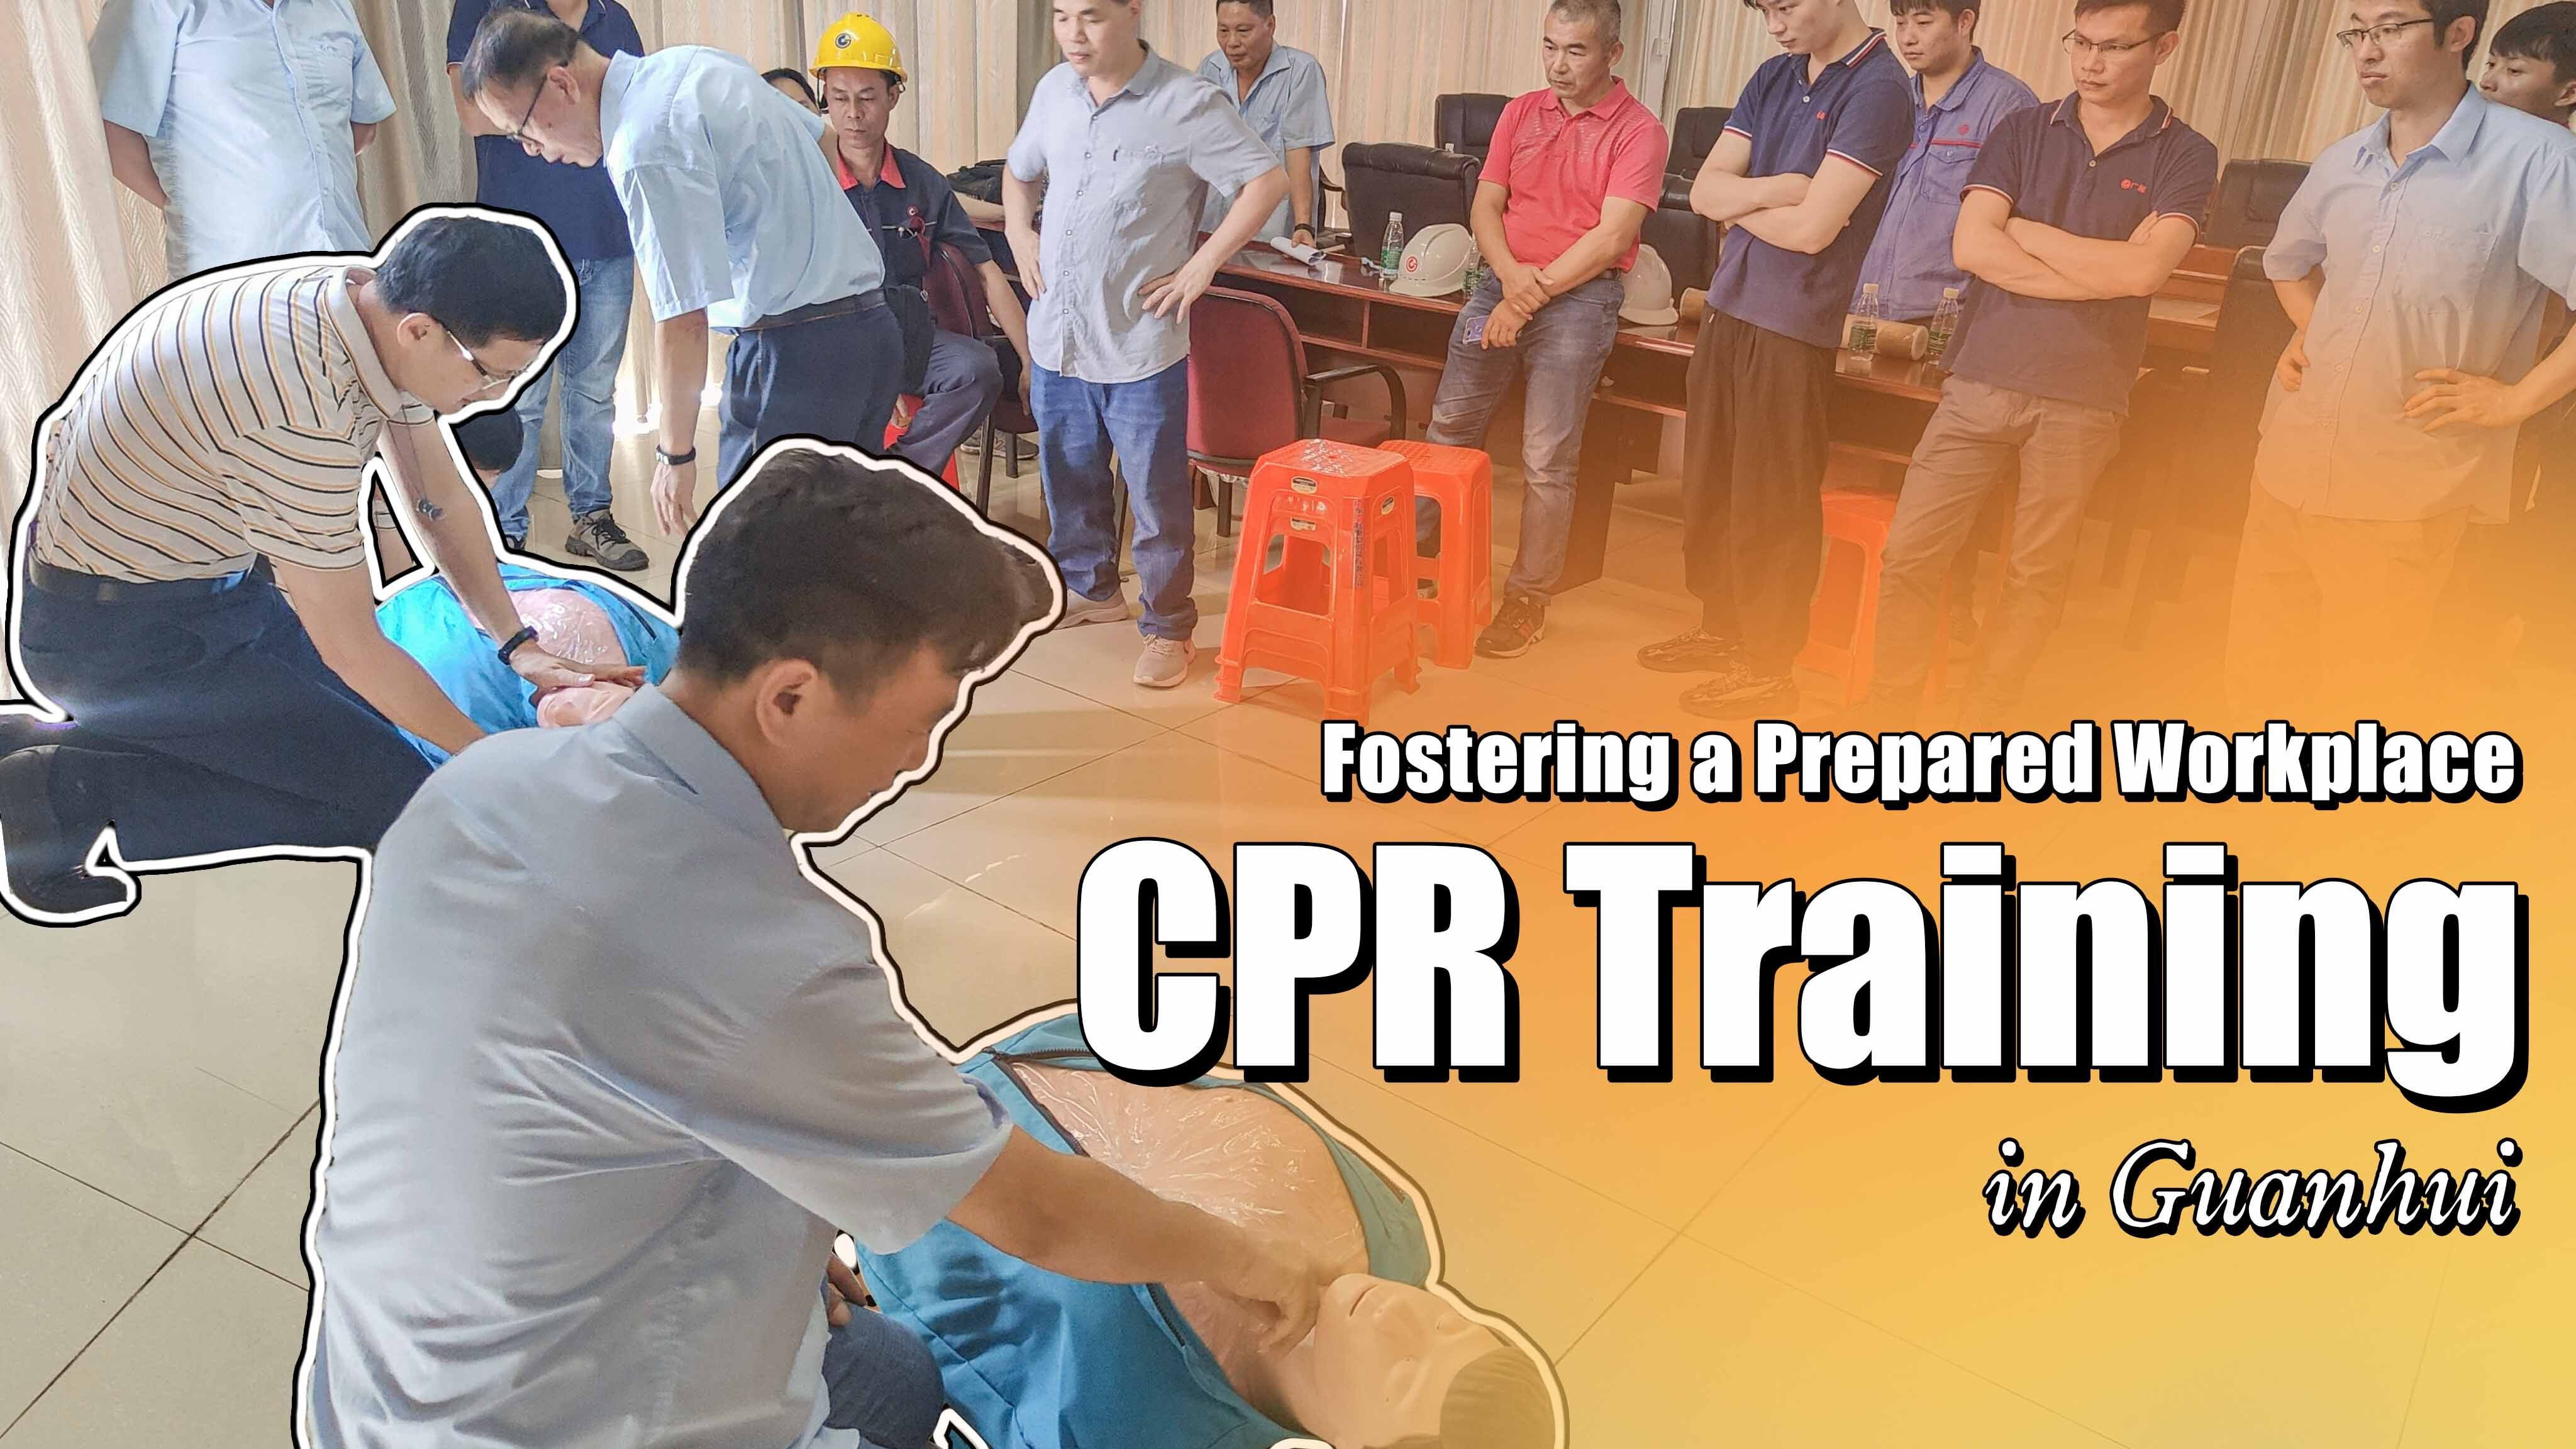 CPR Training: Fostering a Prepared Workplace at Guanhui